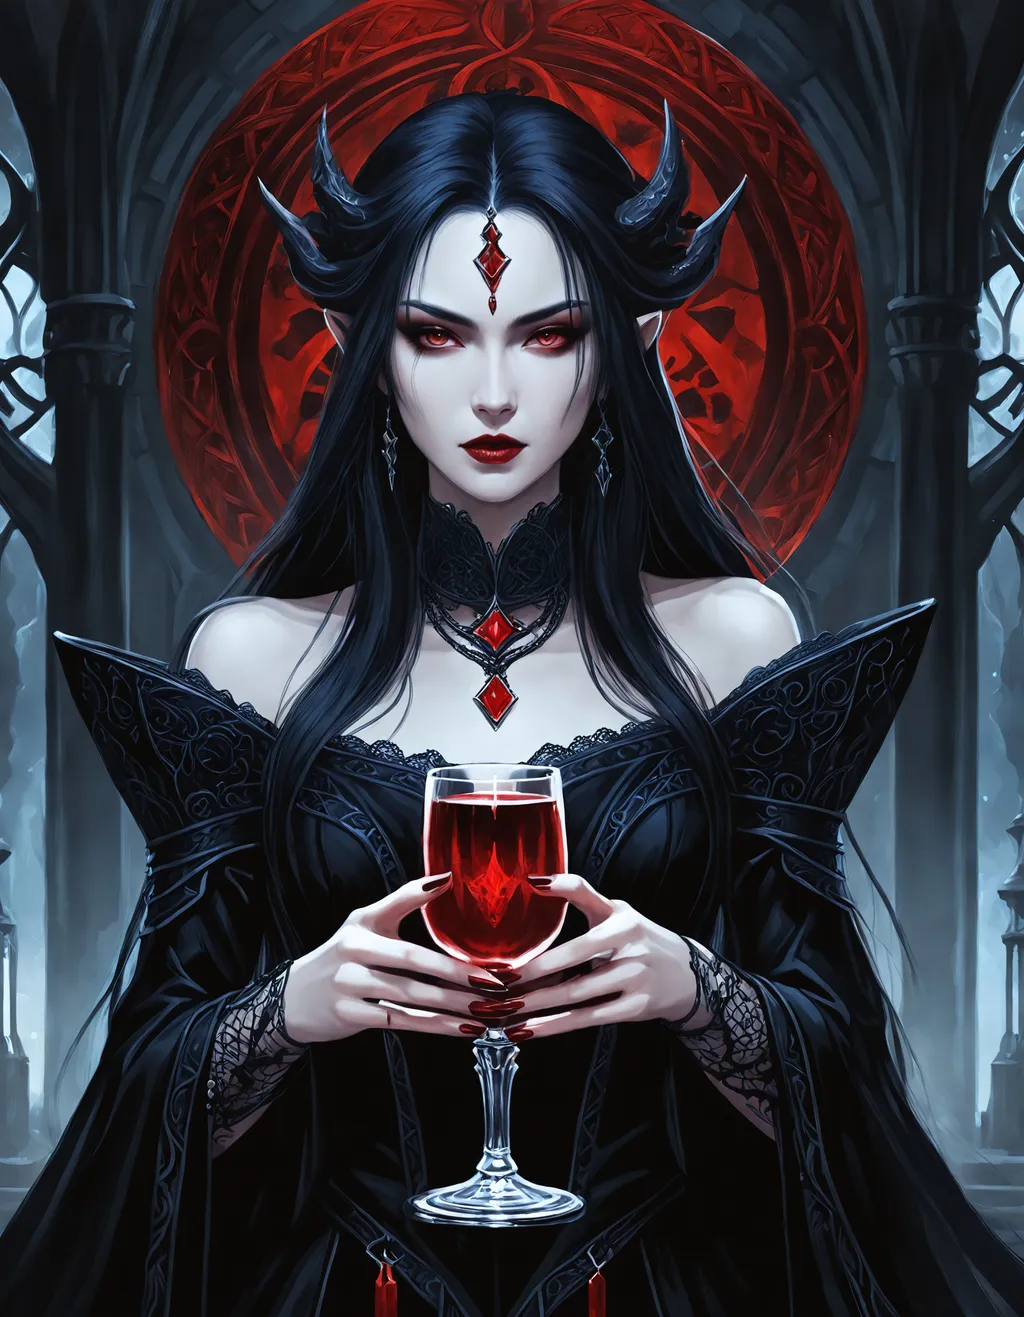 Prompt: Chthonic sorceress holding a goblet of blood, Stygian, Phantasmagoric, Sepulchral, Cimmerian, ((breathtaking)), ((striking)), ((realistic character)), ((stylized digital painting)), ((fantasy)), ((invokes an emotional response)), ((realistic artwork)), ((riveting)), ((captivating)), ((attractive)) (elegant), black velvet, lace accents, occult, female cult leader.